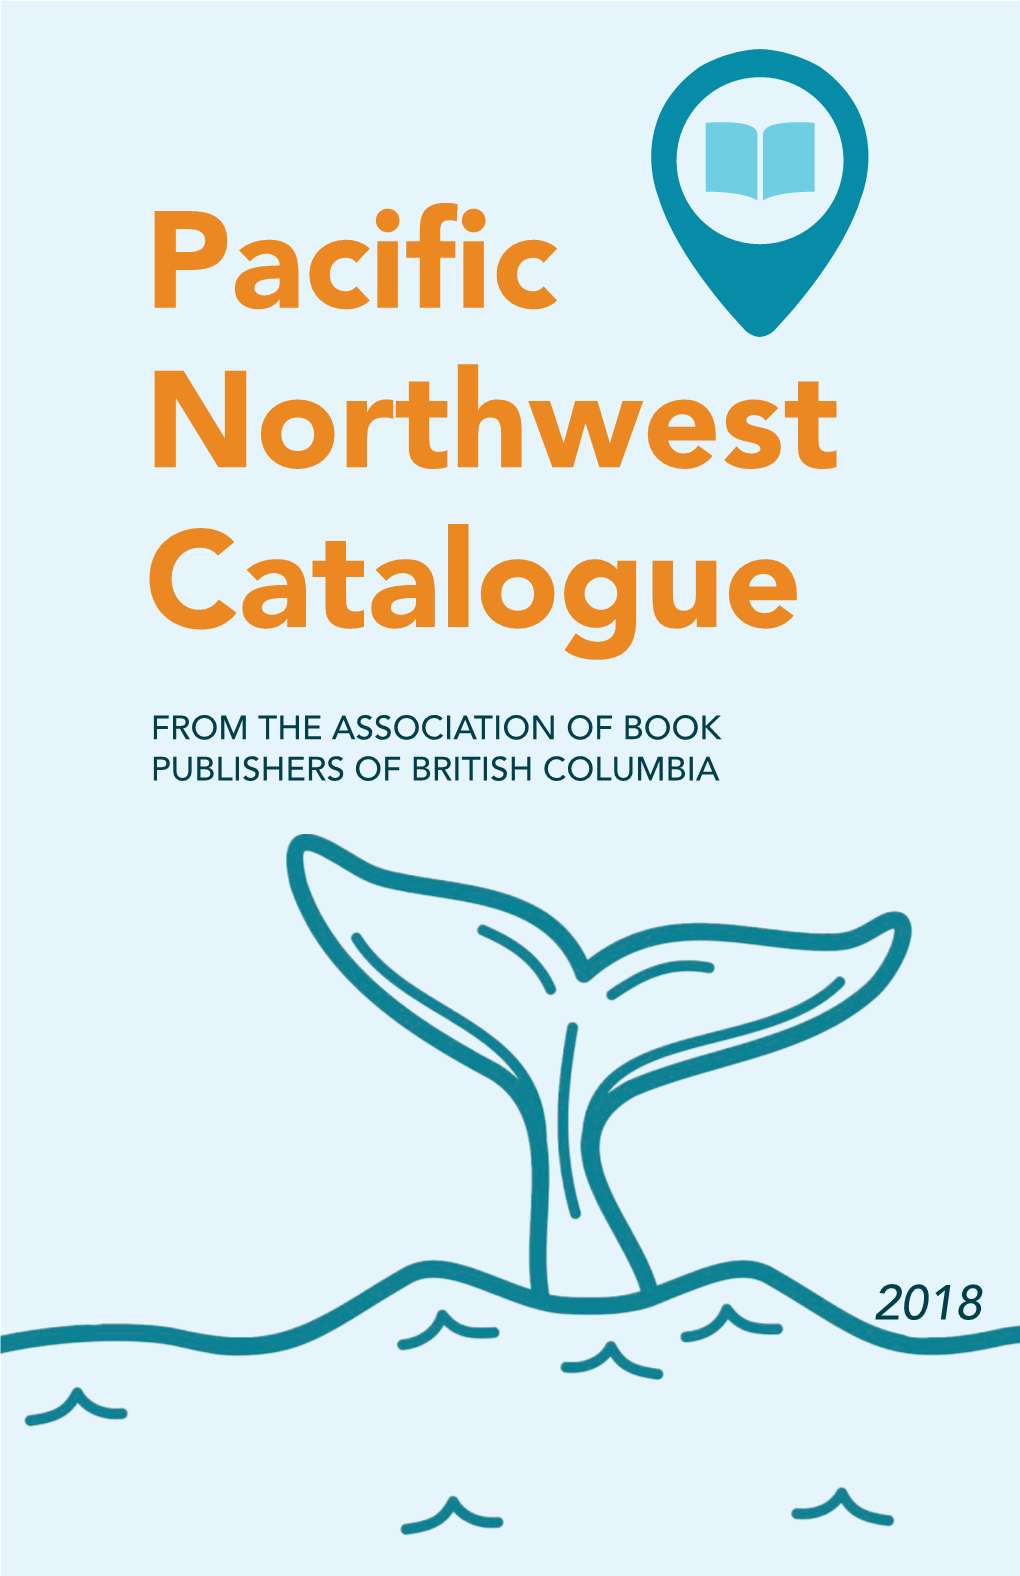 Pacific Northwest Catalogue from the ASSOCIATION of BOOK PUBLISHERS of BRITISH COLUMBIA